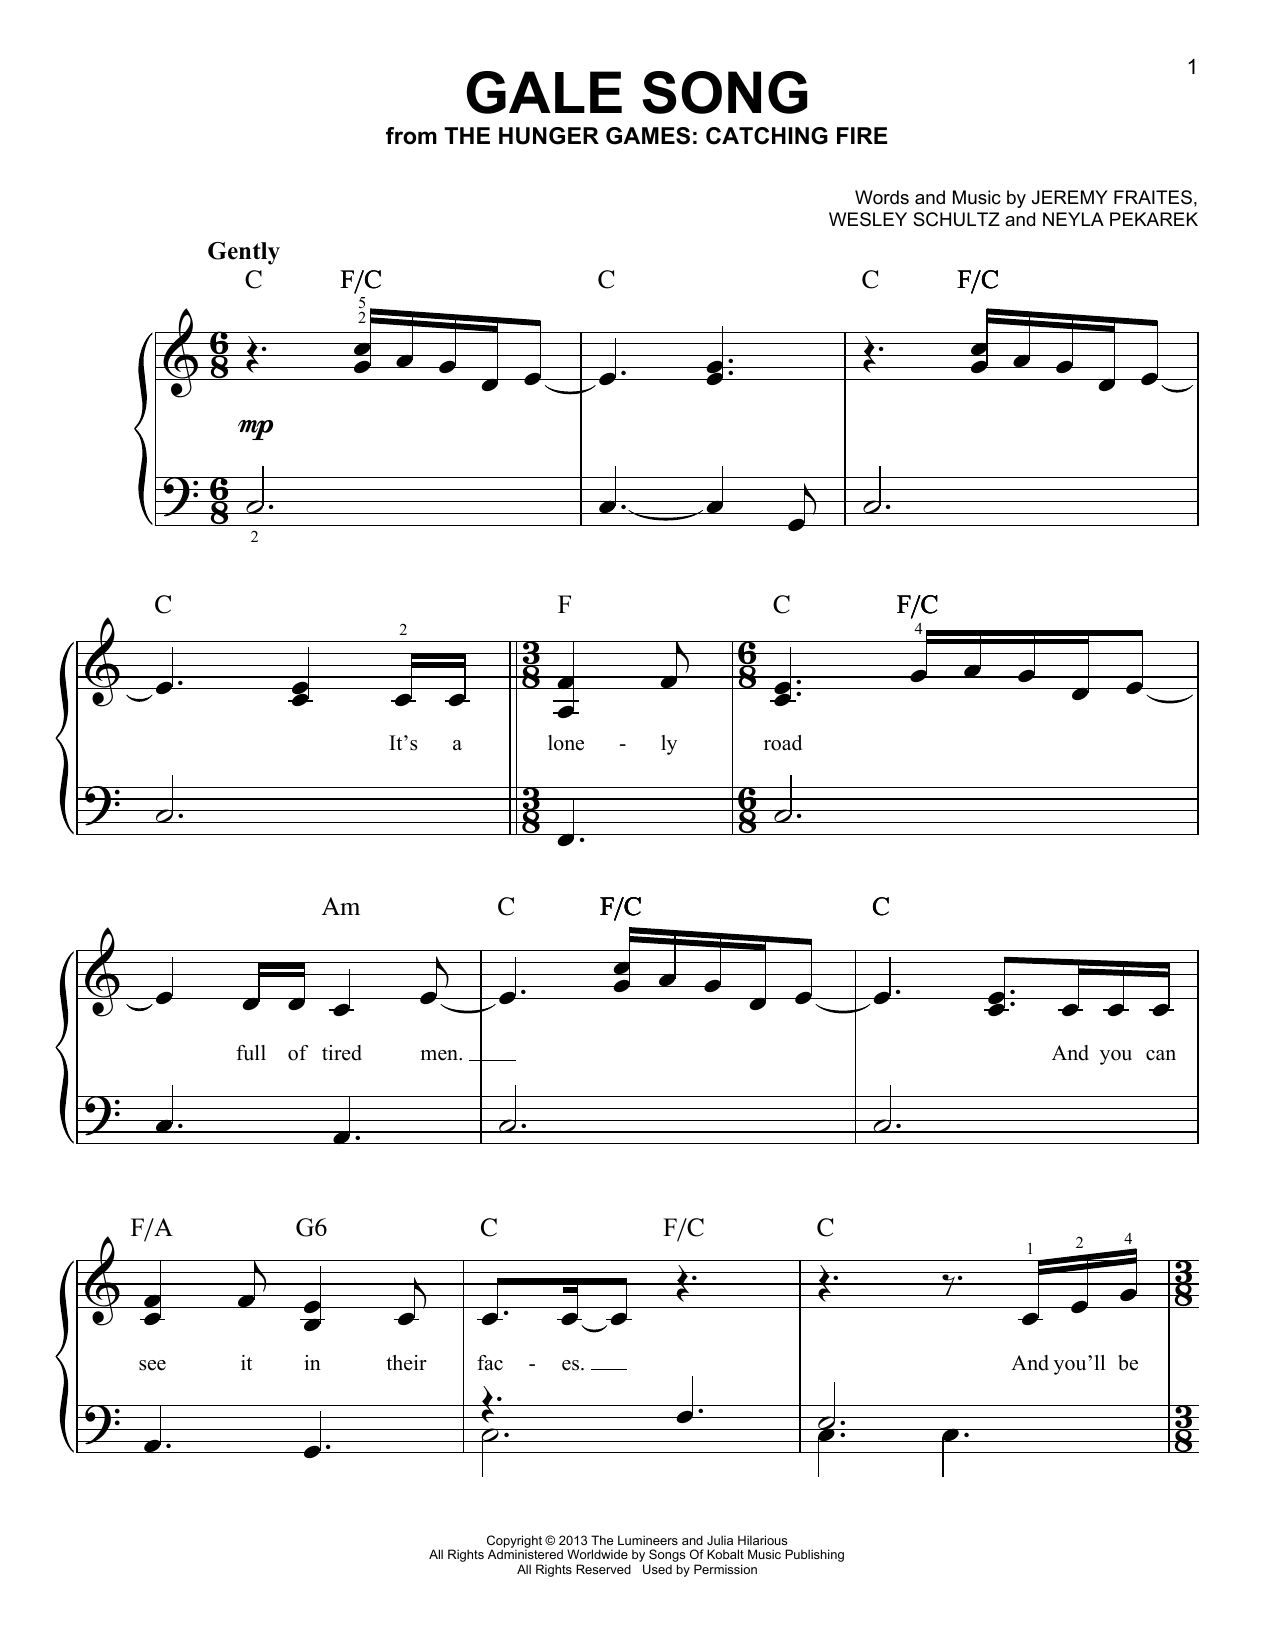 Download The Lumineers Gale Song Sheet Music